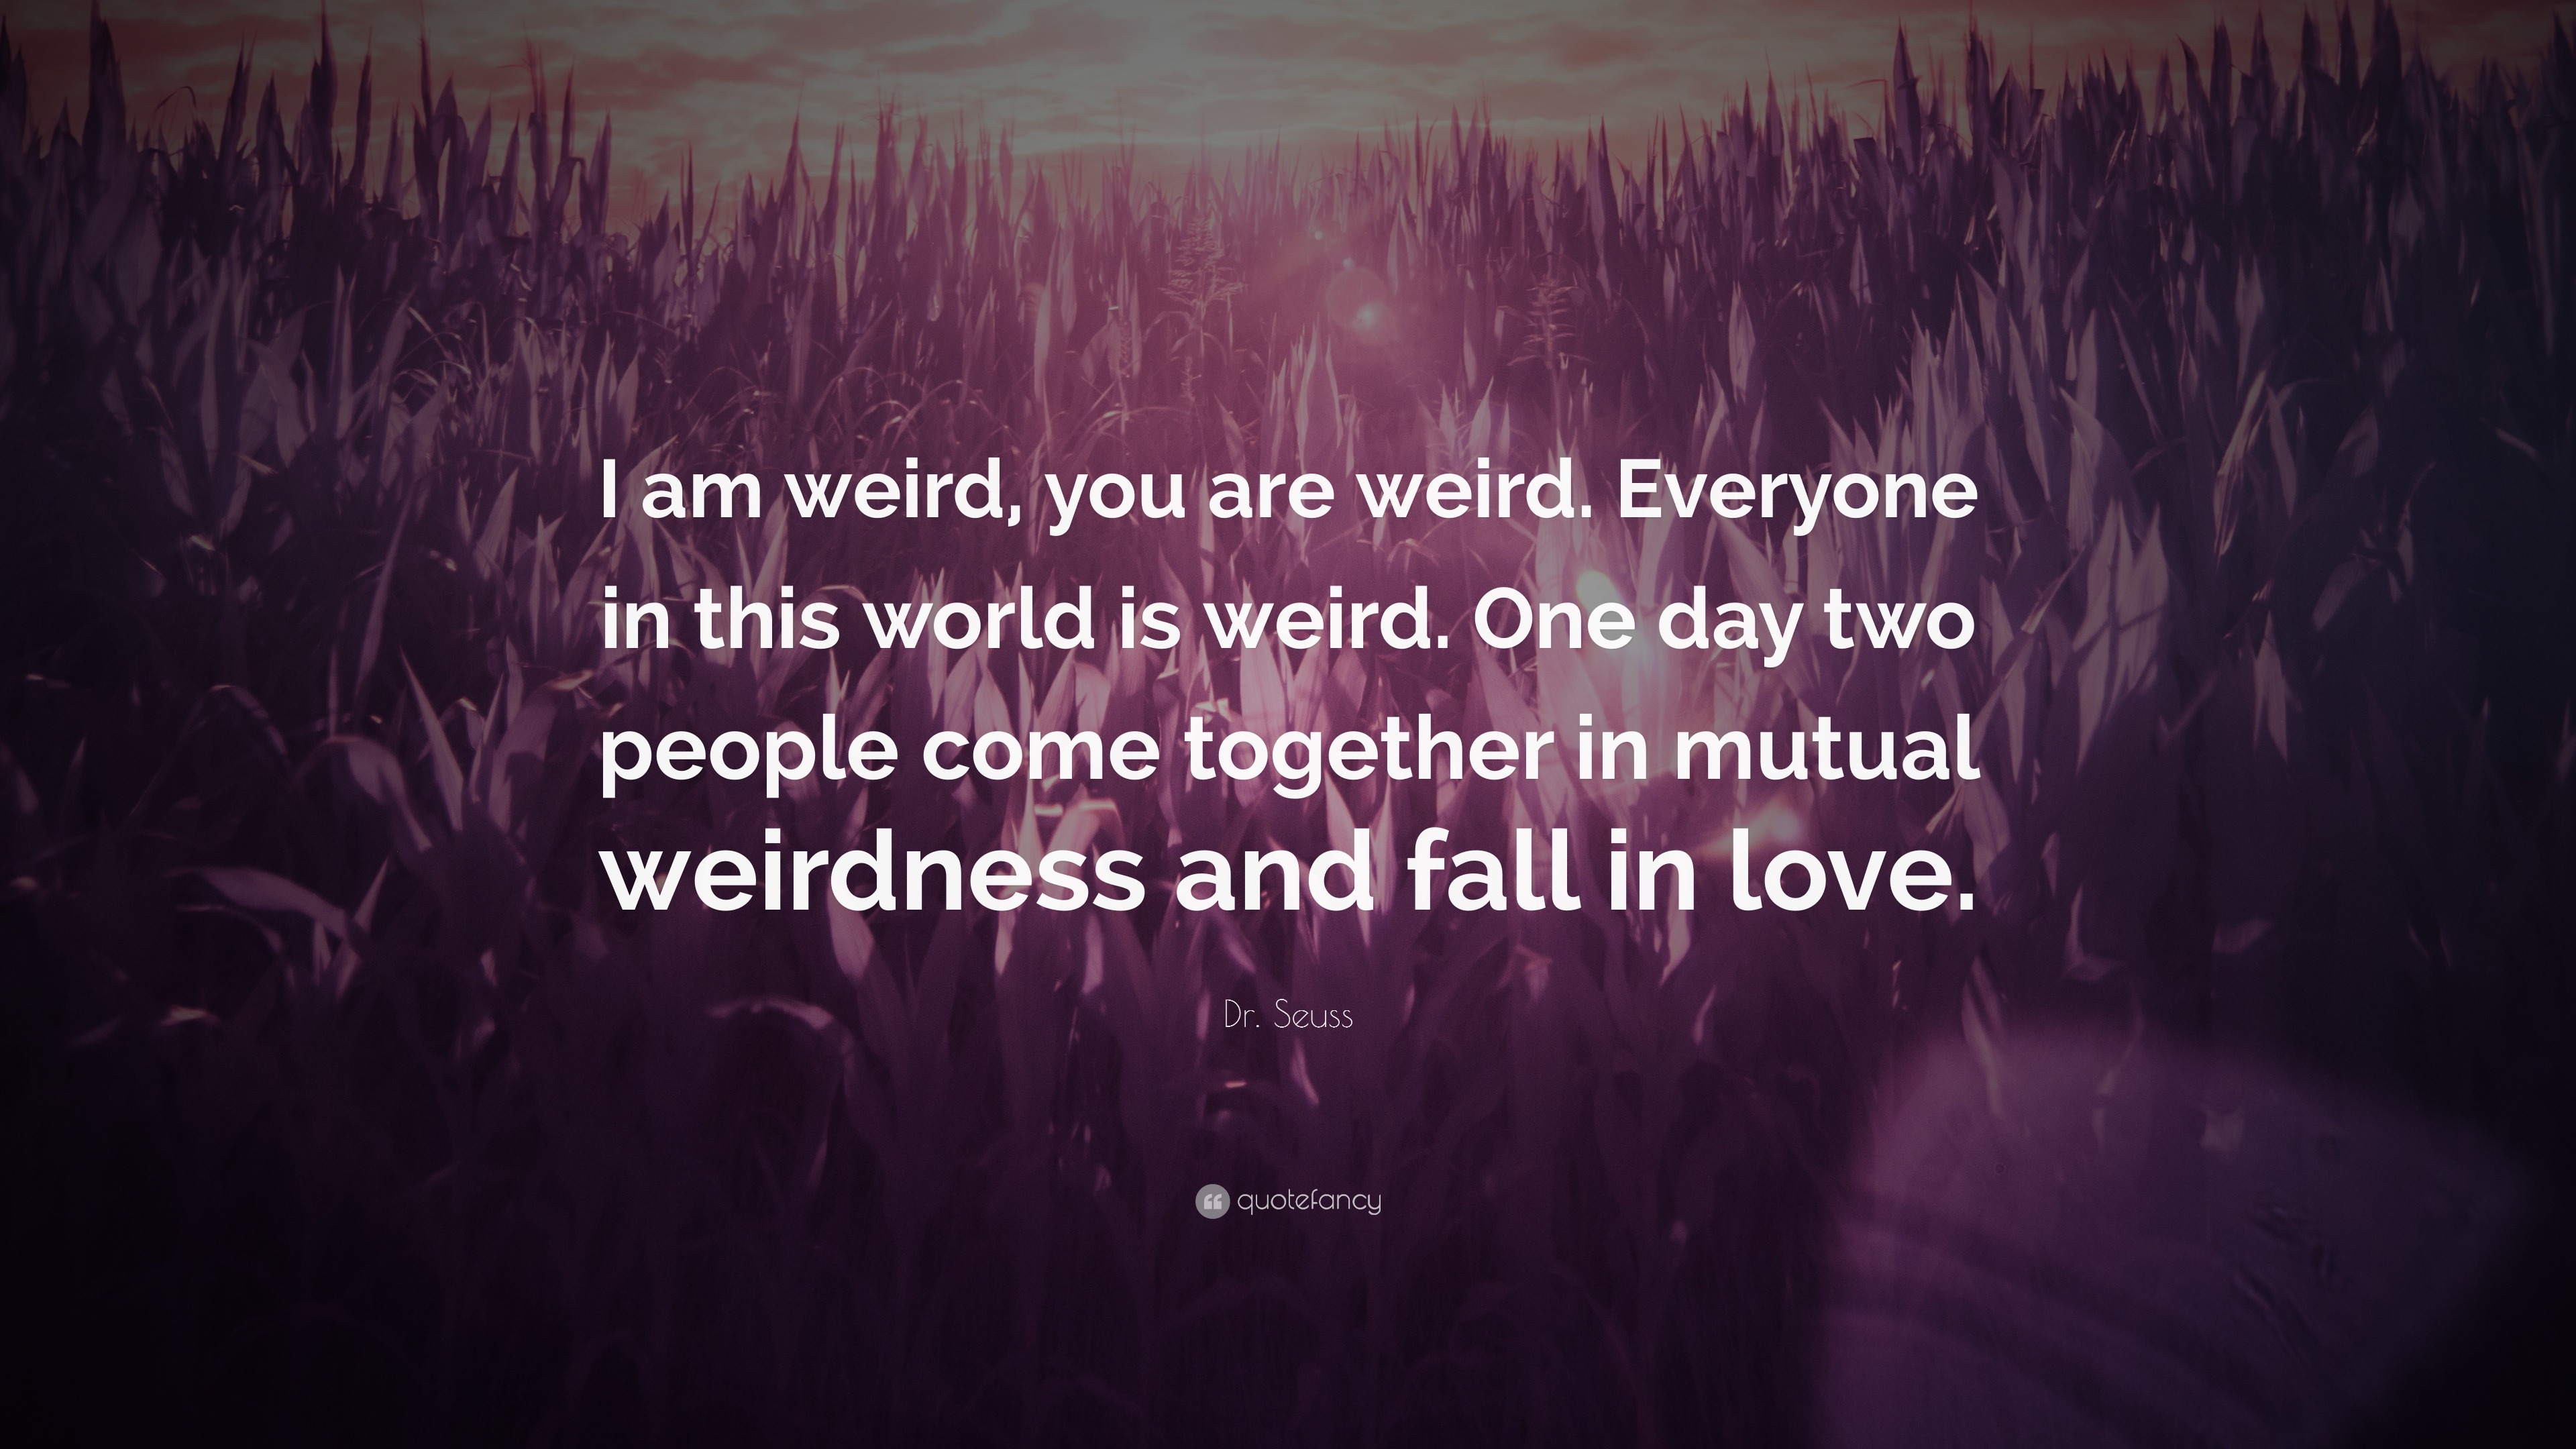 Dr. Seuss Quote: “I am weird, you are weird. Everyone in this world is